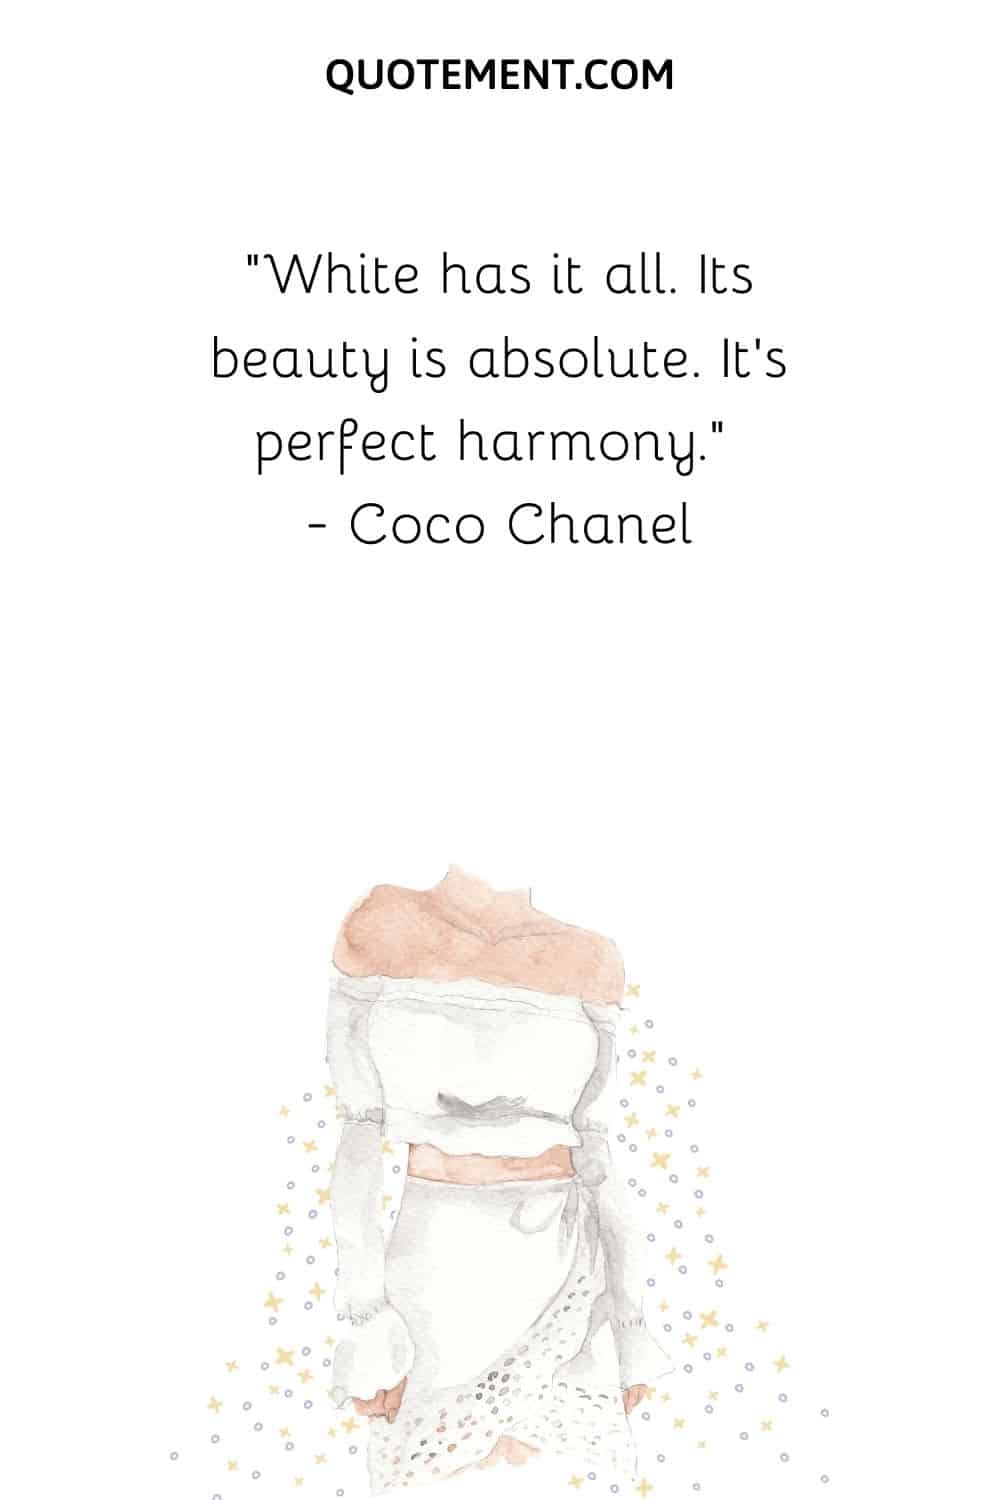 White has it all. Its beauty is absolute. It’s perfect harmony.